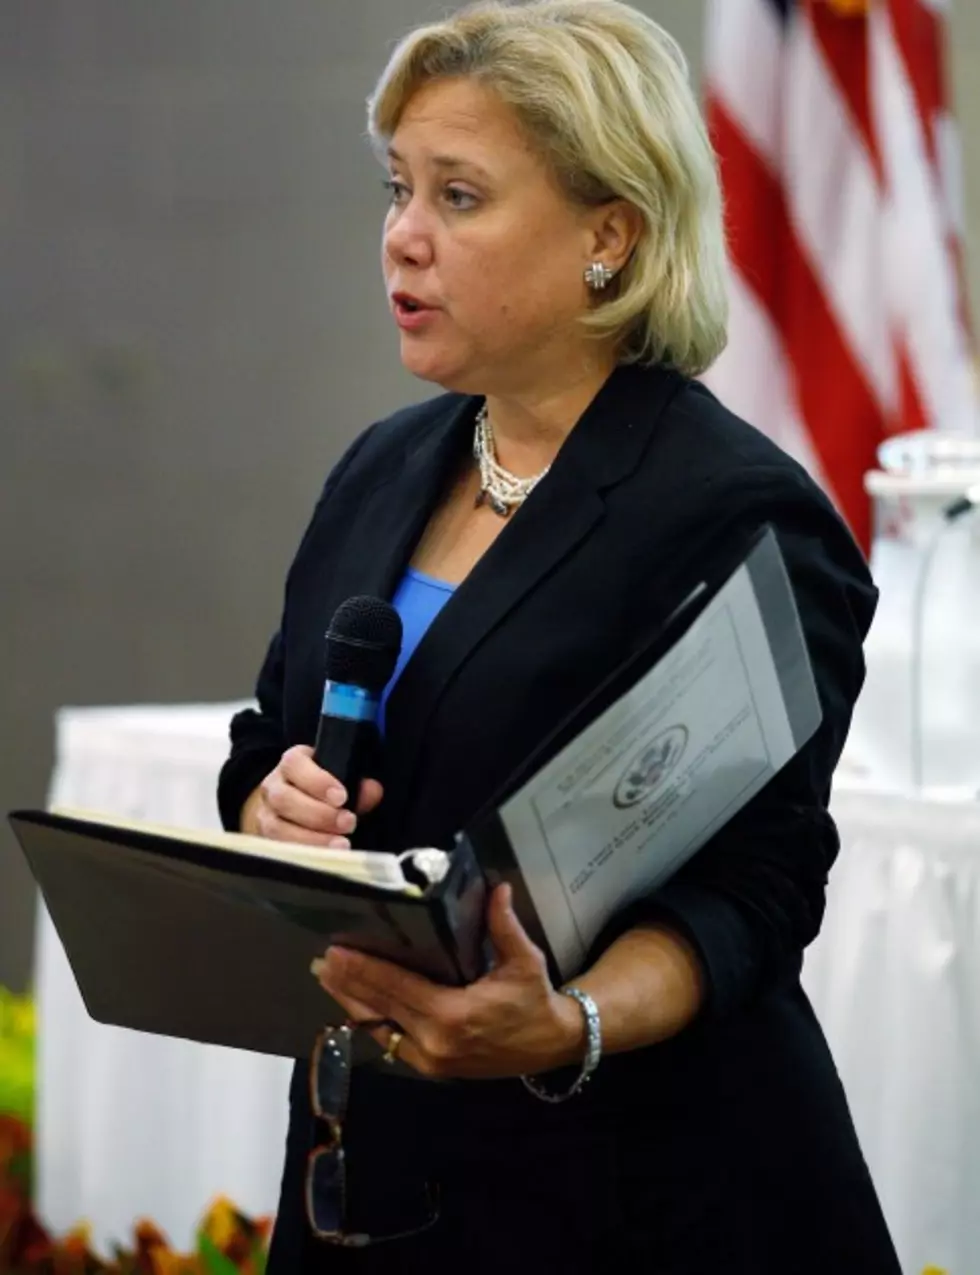 Does Mary Landrieu Owe More Money To the Treasury For Flights? [POLL]